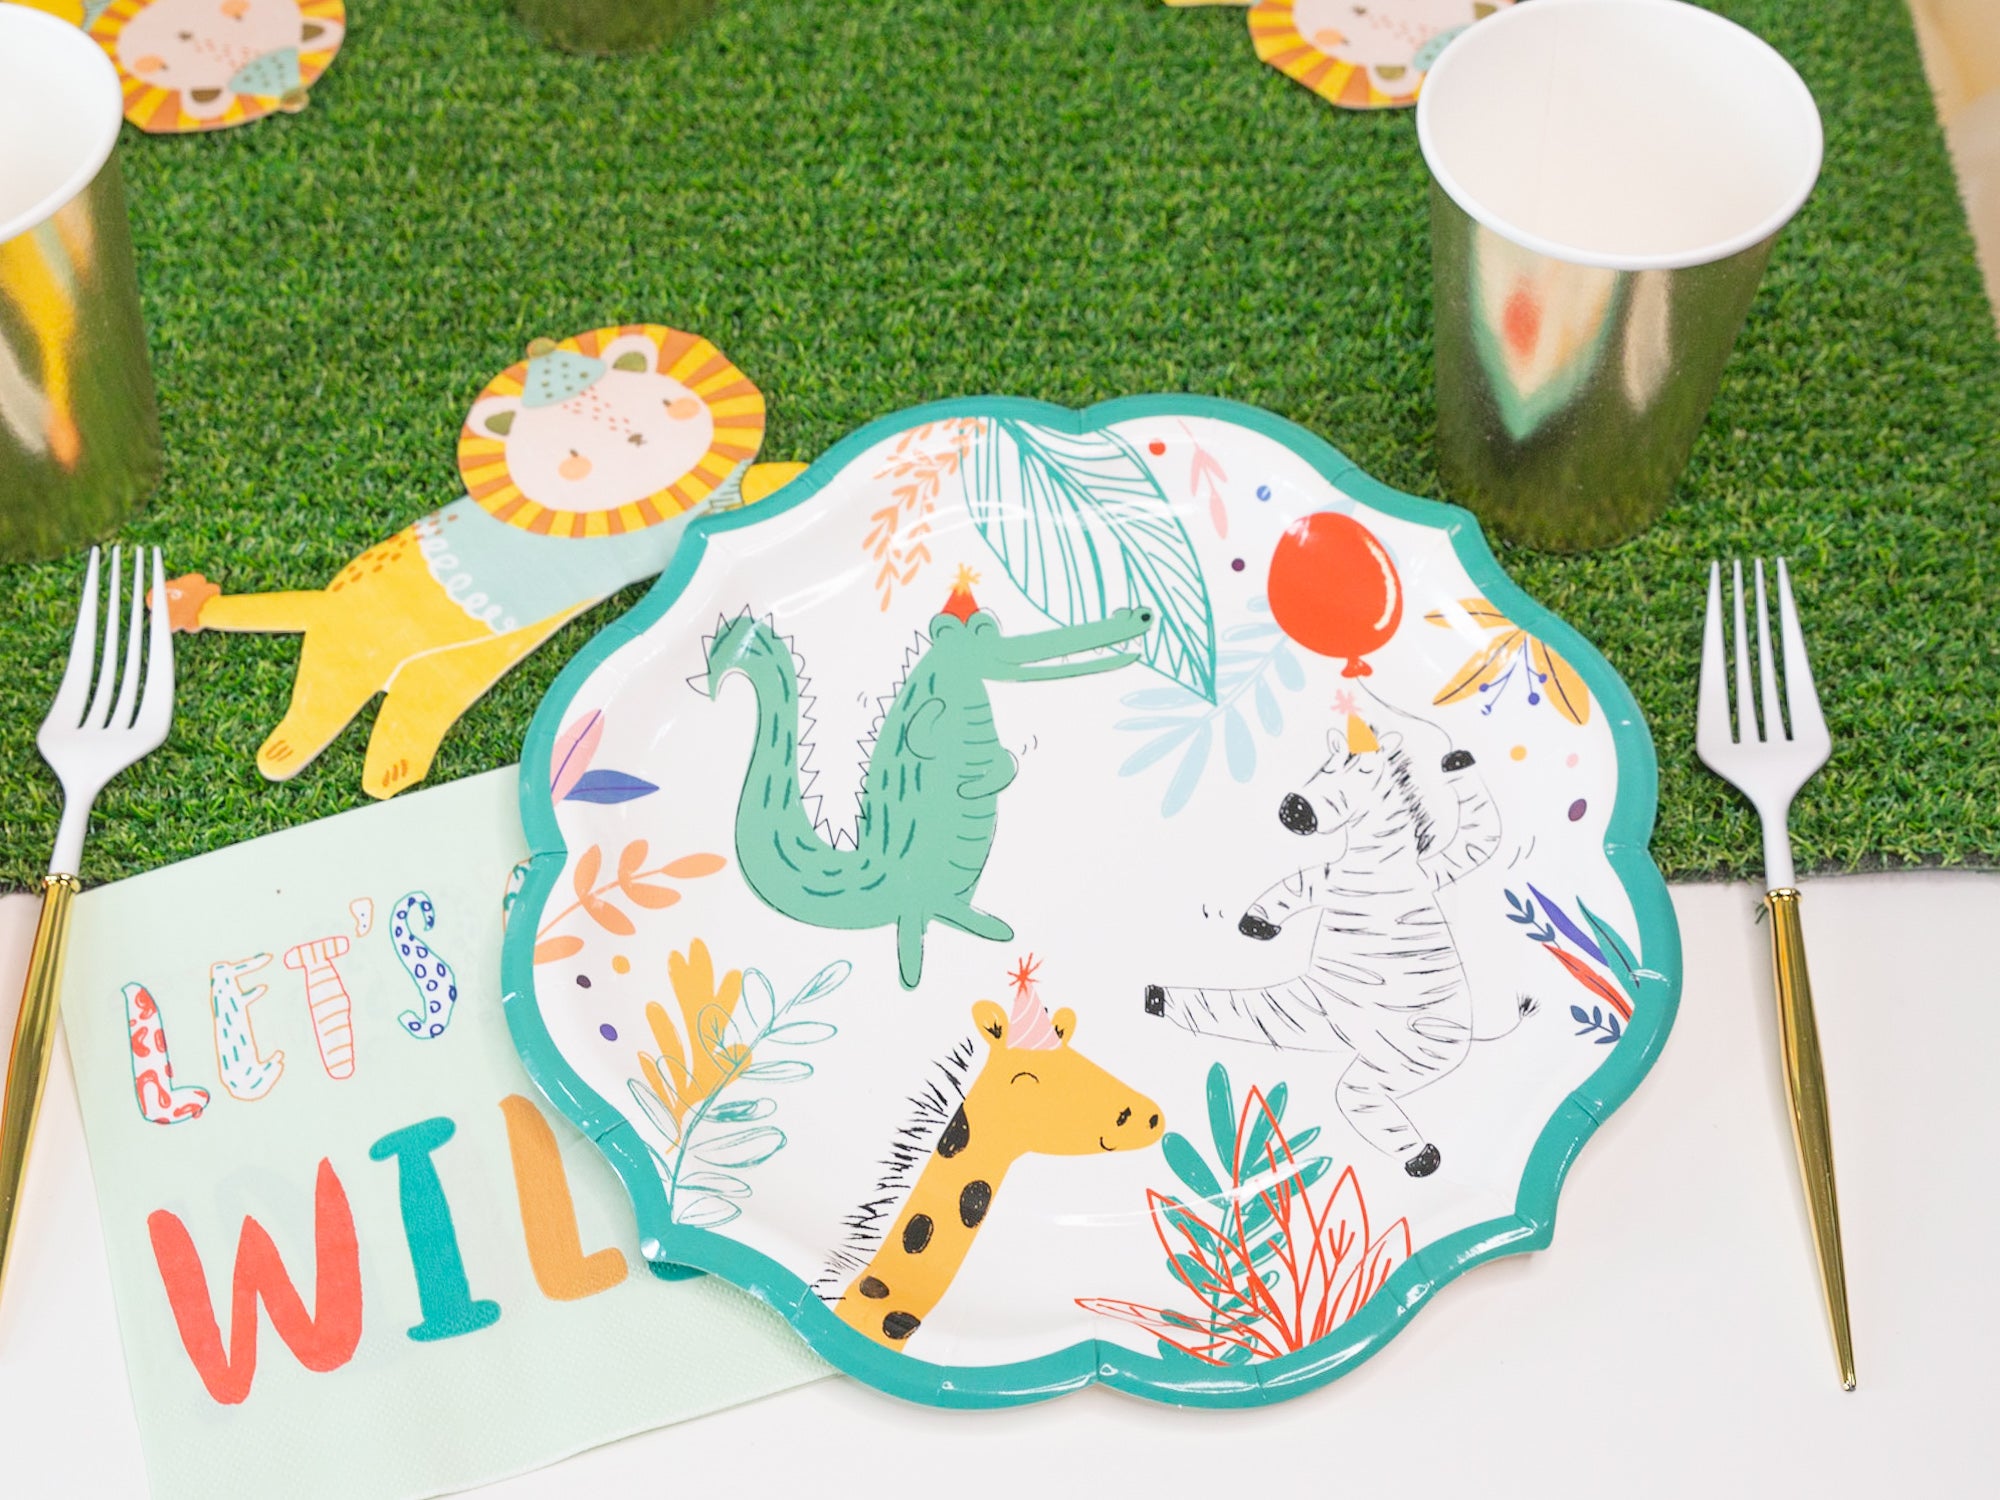 Let's Get Wild Party Animal Place Setting | The Party Darling